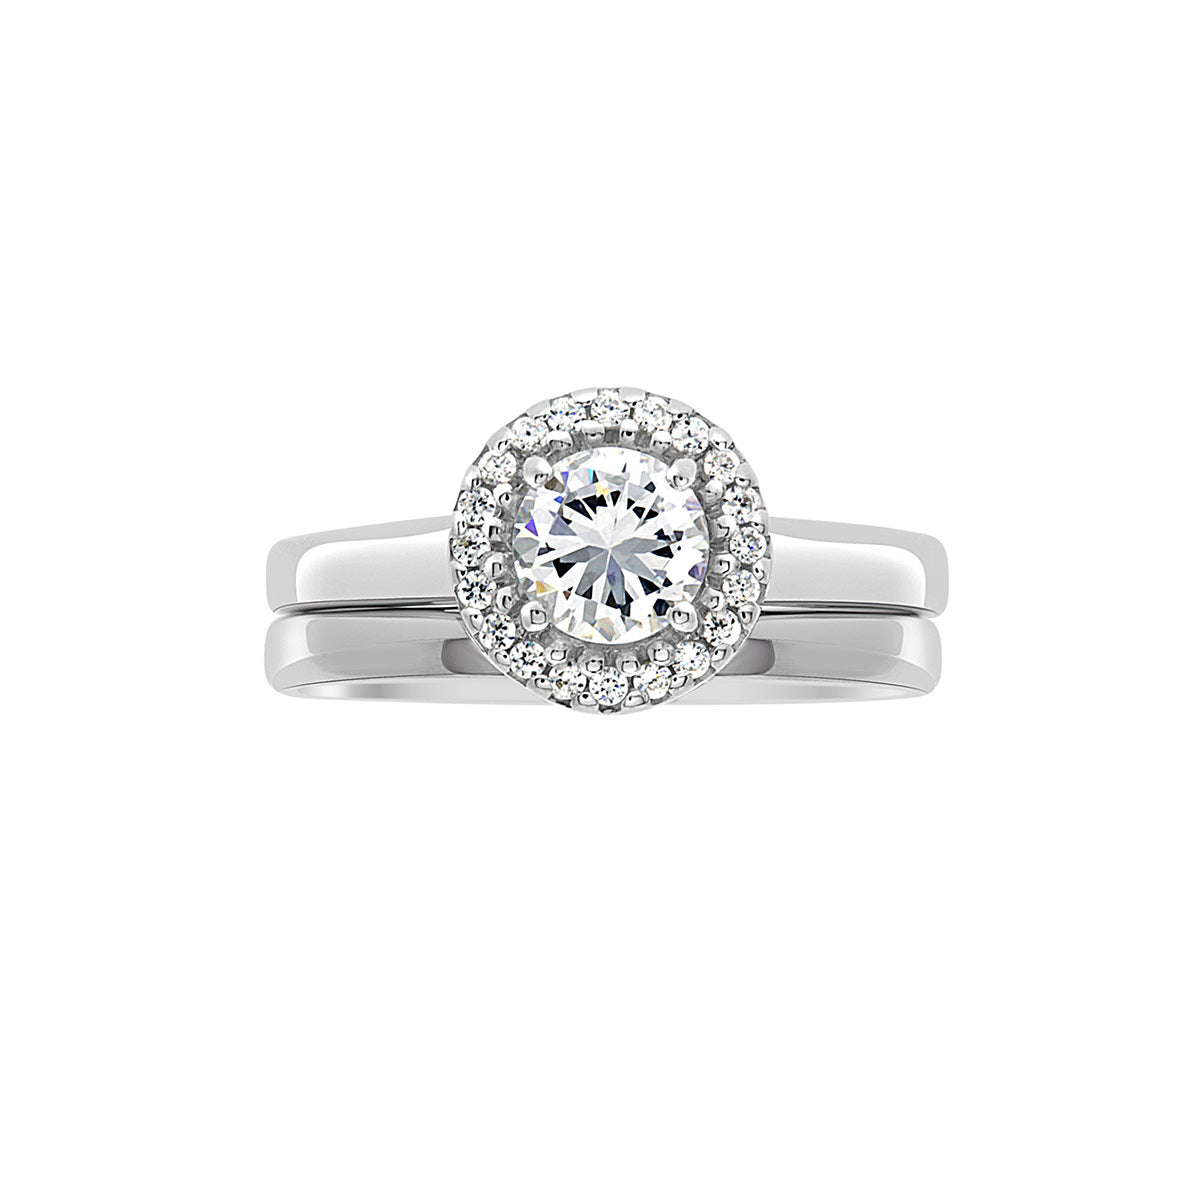 Round Vintage Engagement Ring in a horizontal position against a white background. Also featurning a matching plain wedding ring